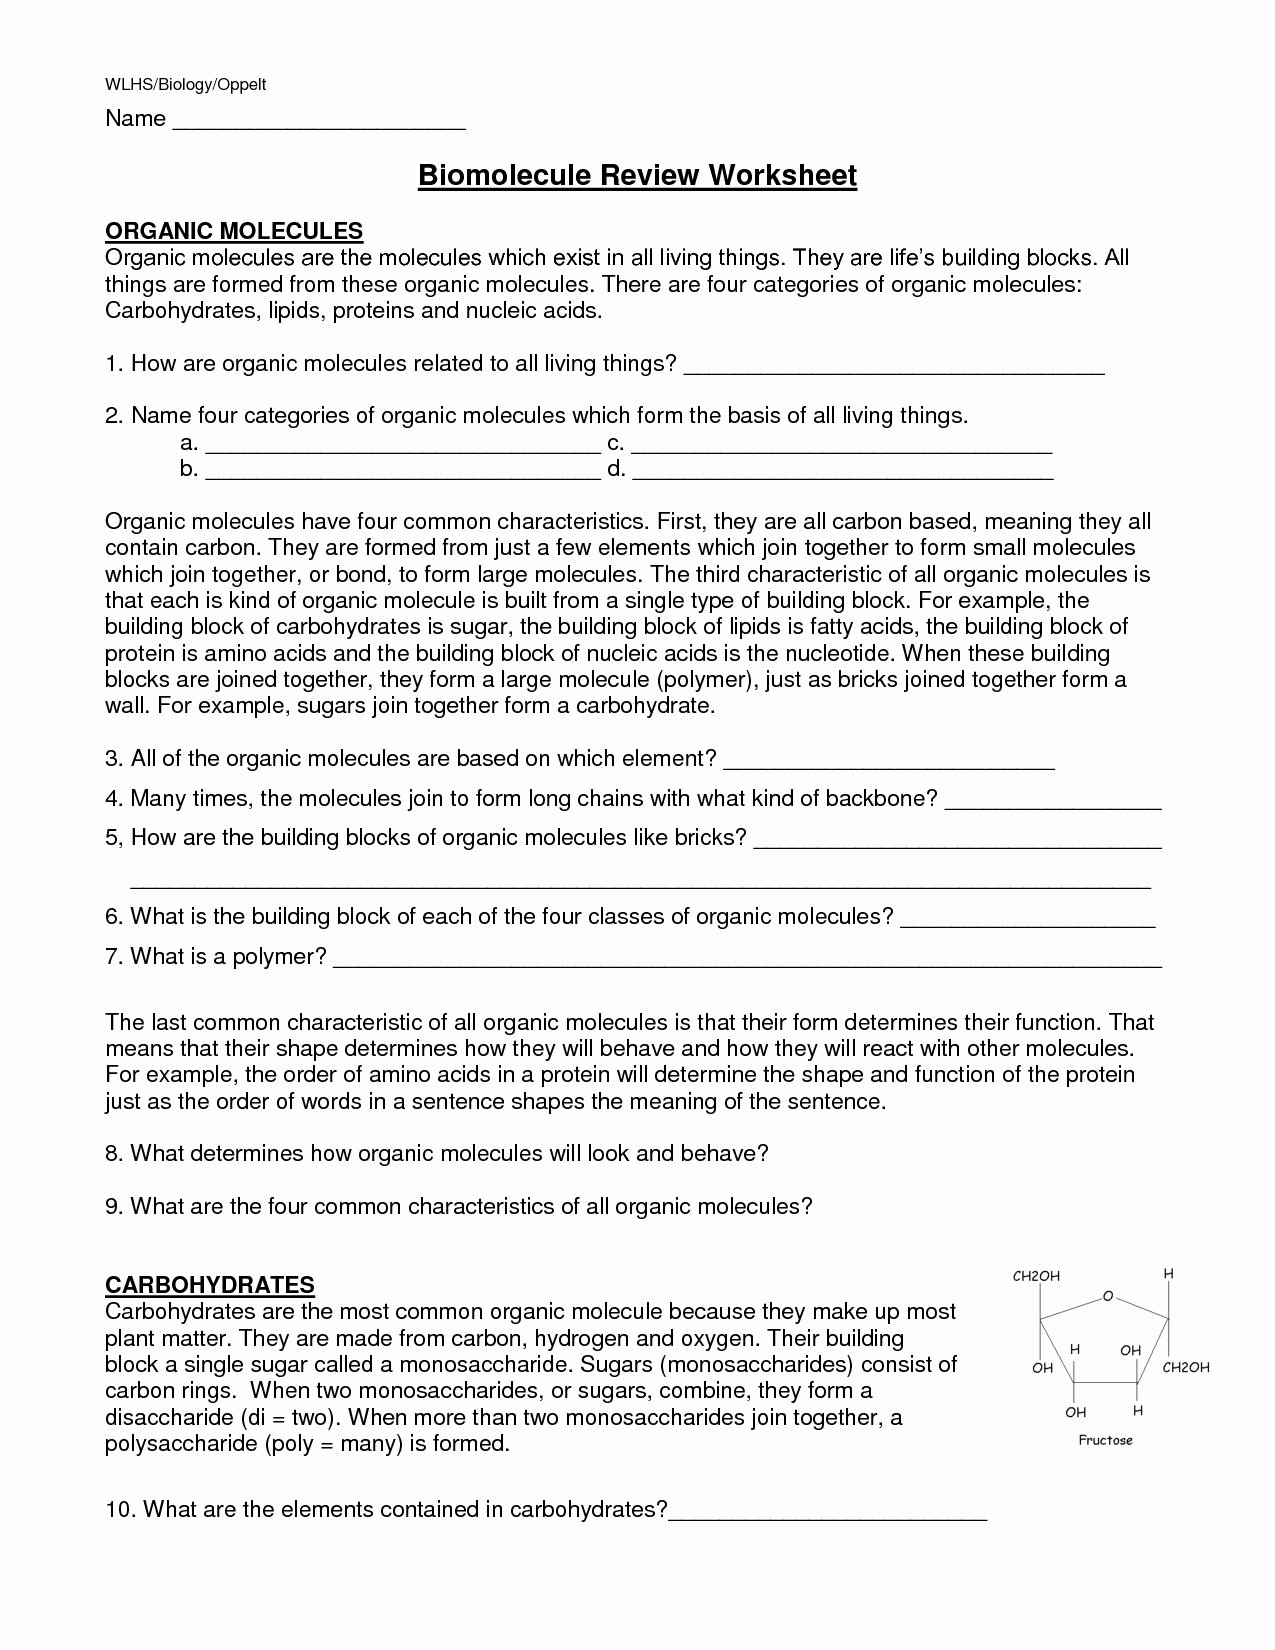 Organic Molecules Worksheet Answer Key Awesome 11 Best Of Carbon Carbohydrate Structure Worksheet